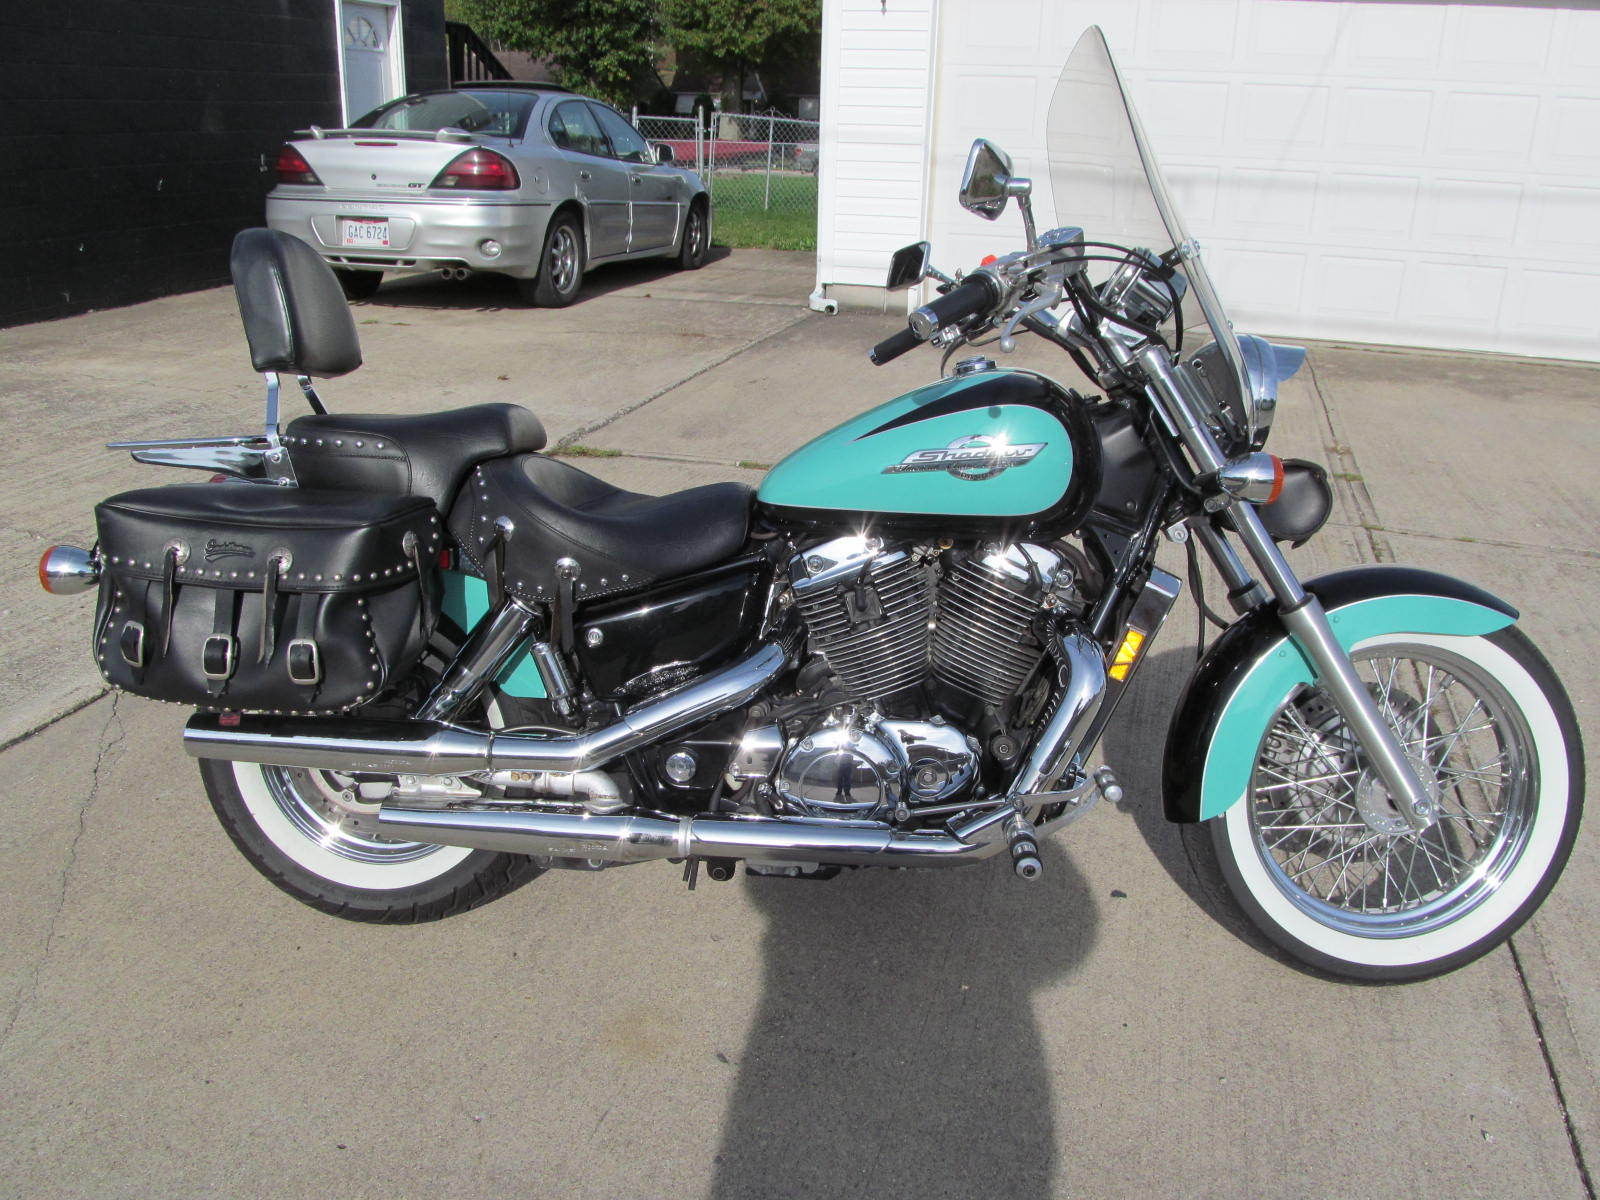 1998 Honda Shadow Ace 1100 CC Beautiful in Excellent condition